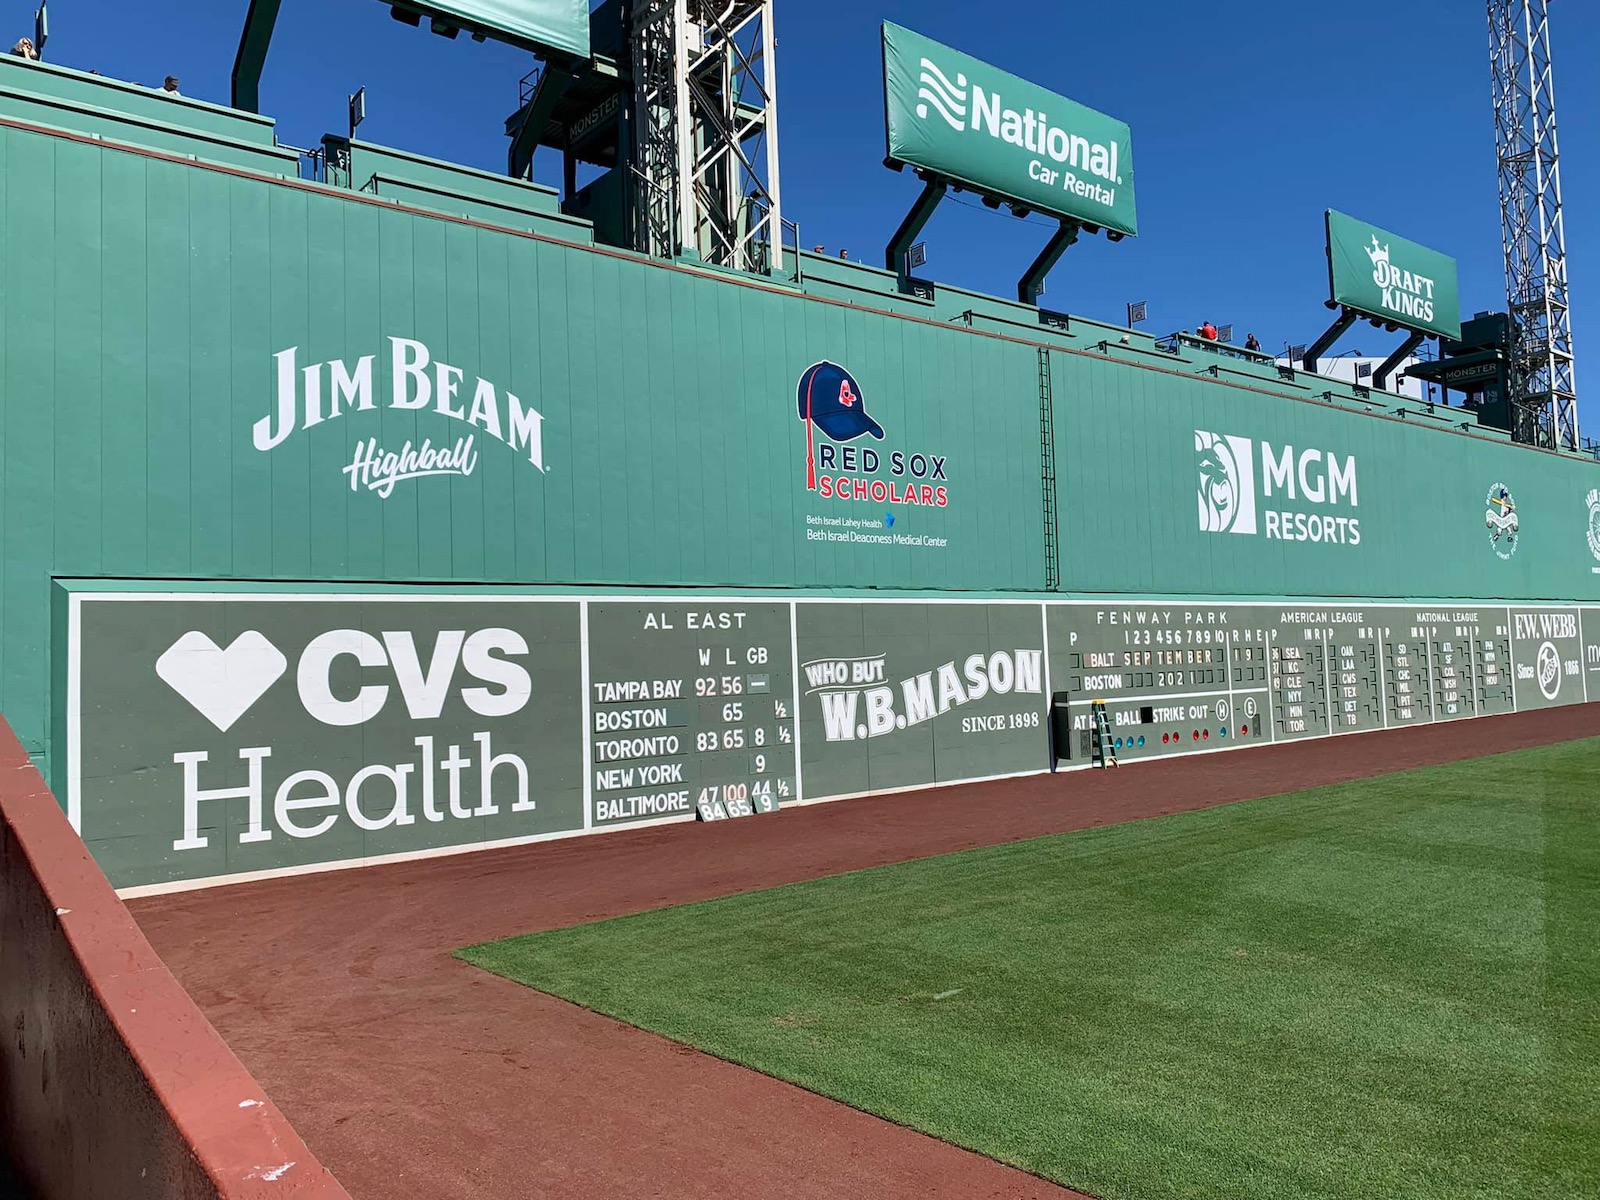 Inside Fenway Park: An Icon At 100